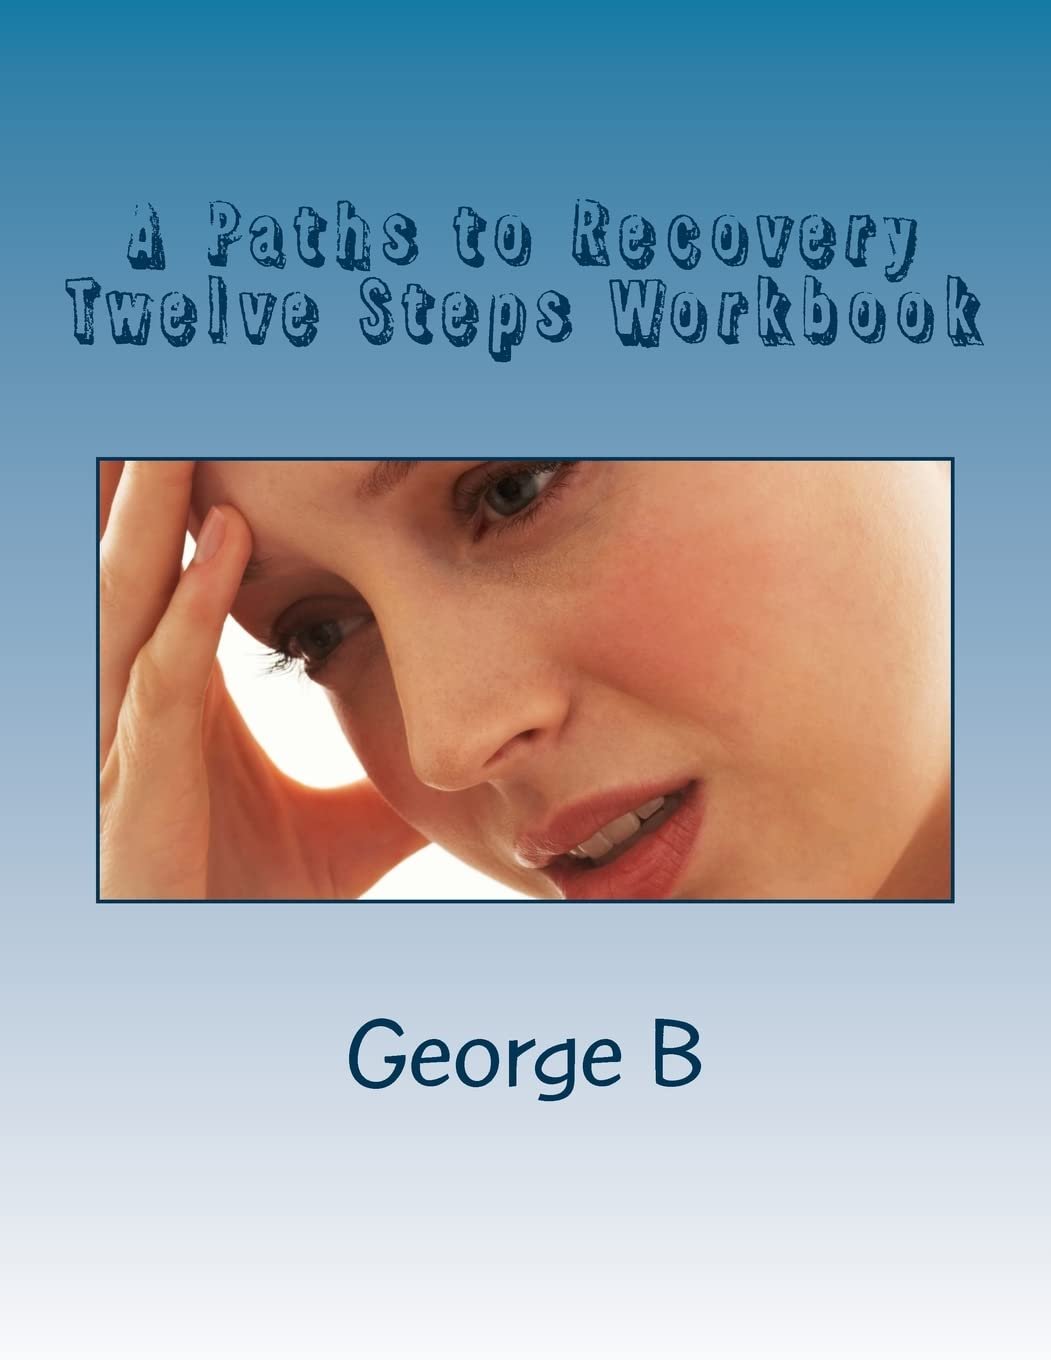  A Paths to Recovery Twelve Steps Workbook: for Families and Friends of Alcoholics